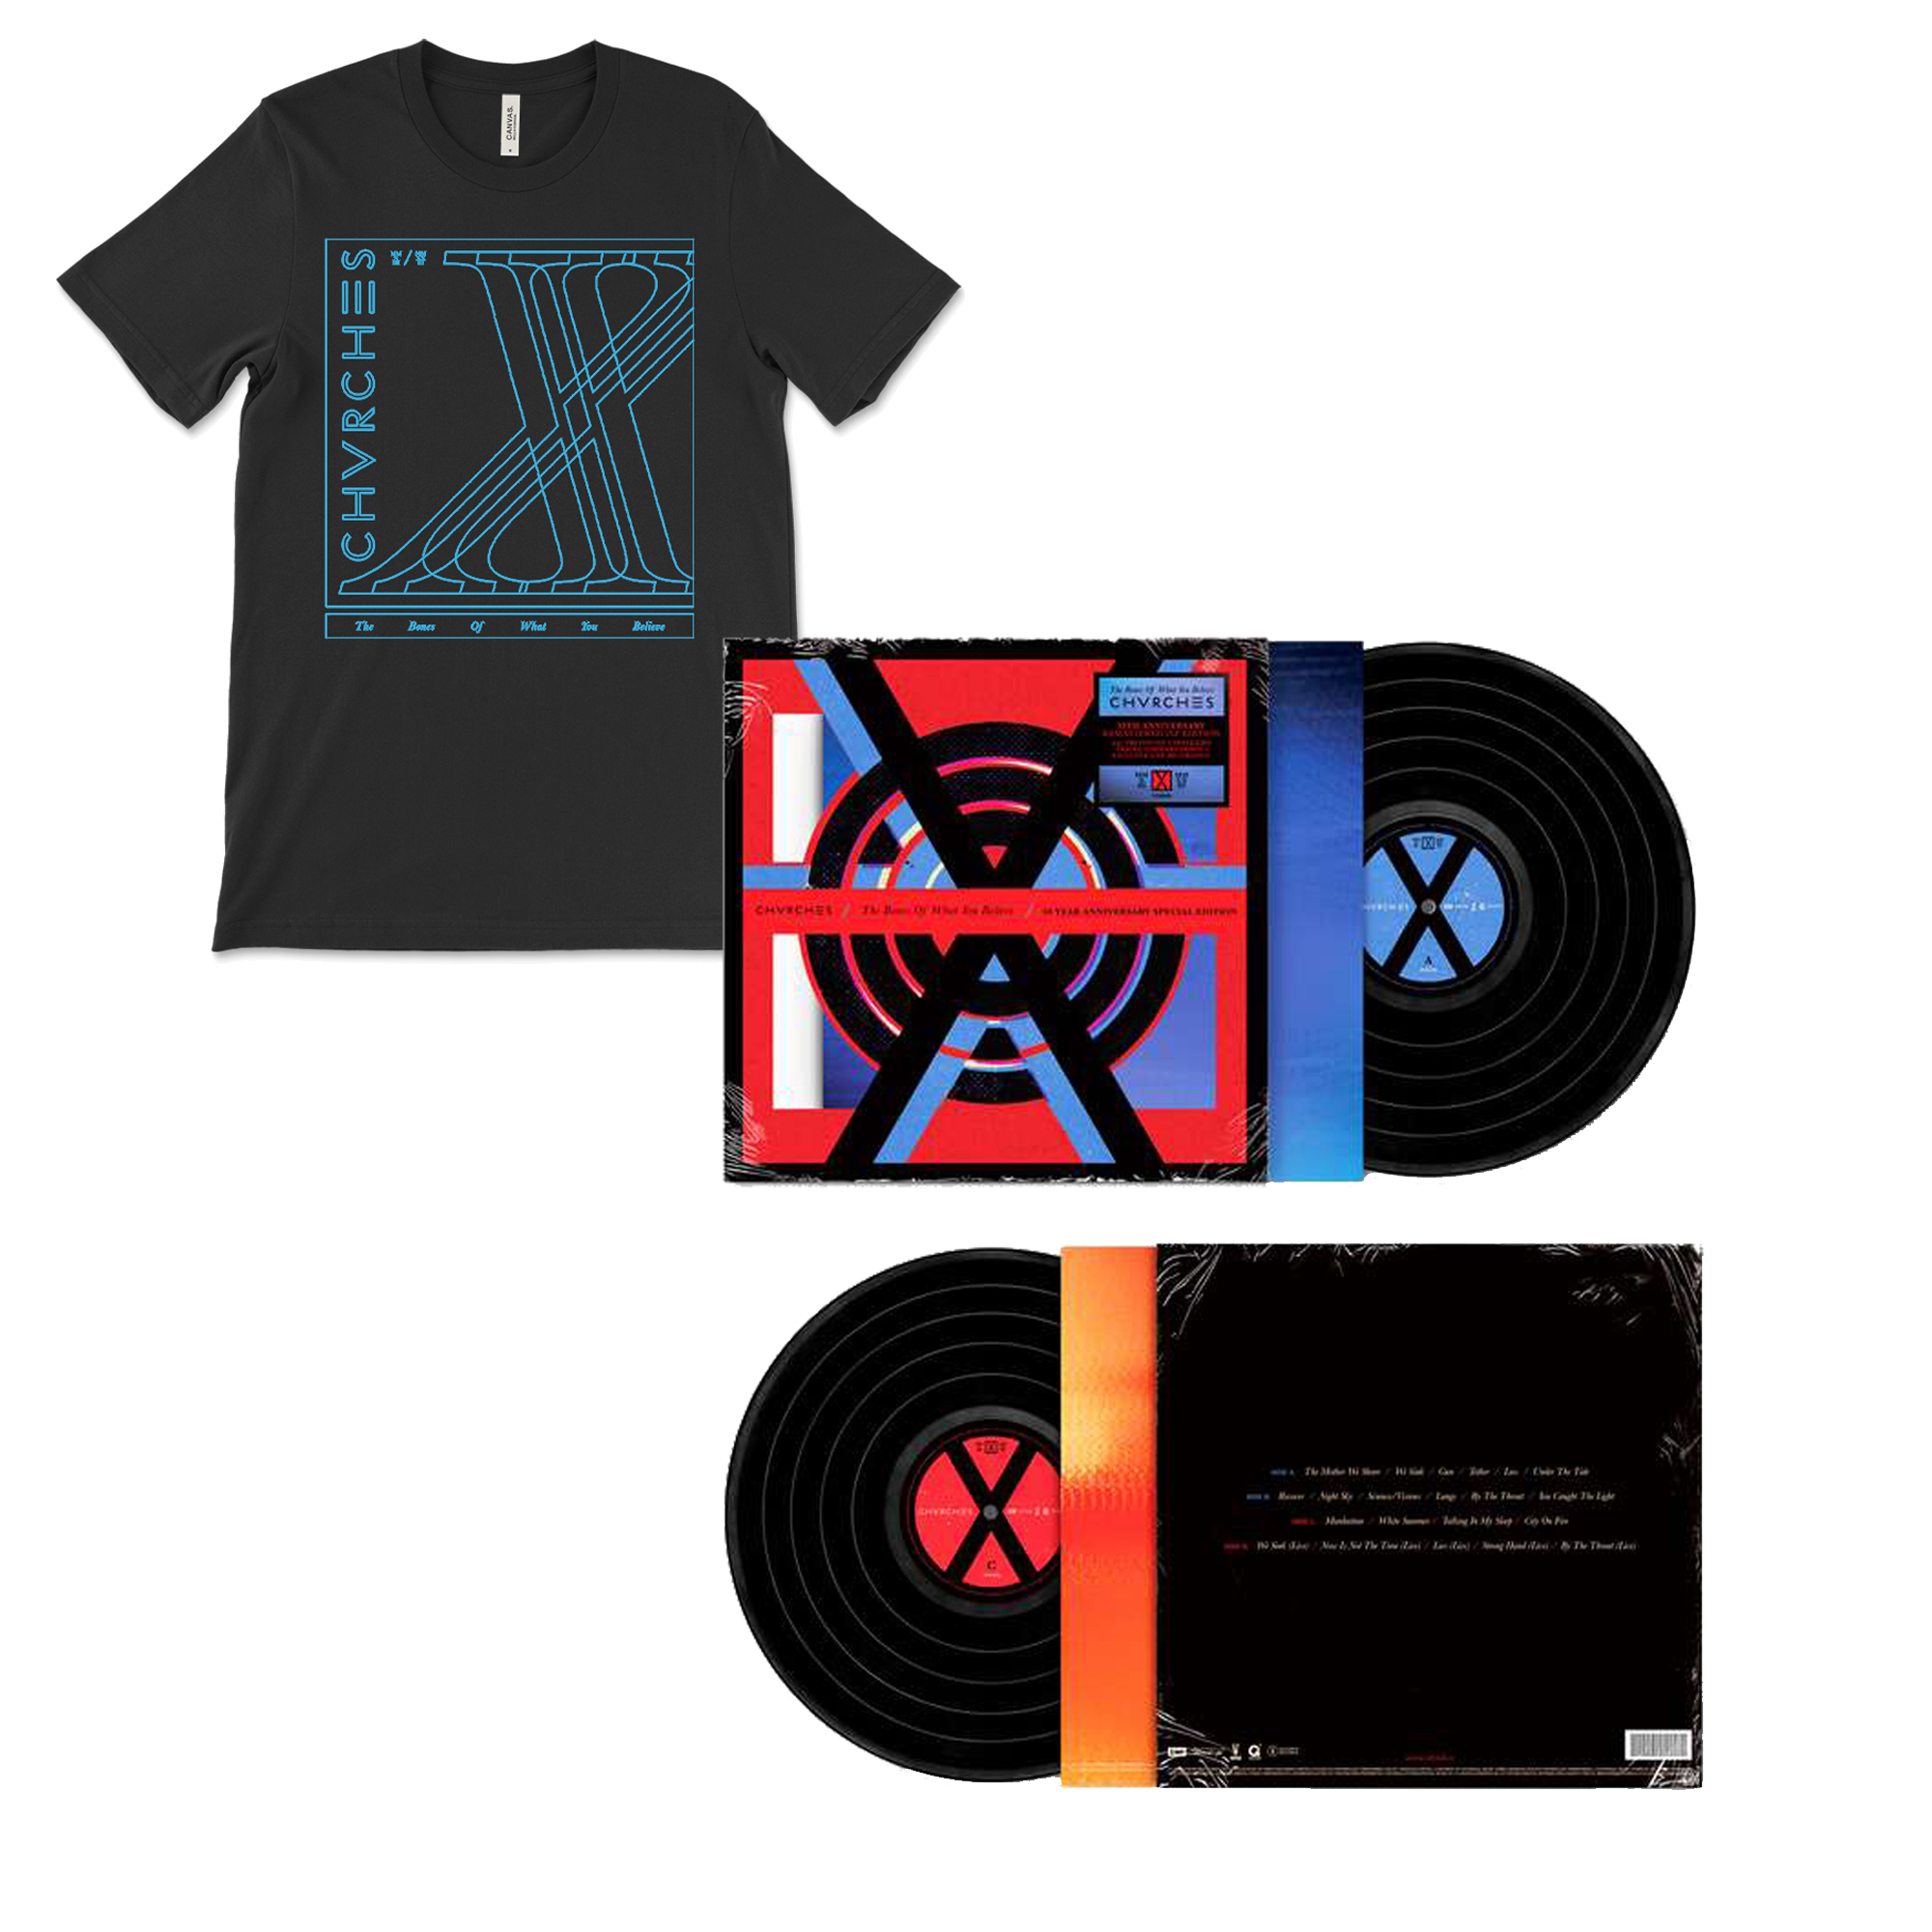 The Bones Of What You Believe (10th Anniversary Edition) 2LP & T-shirt